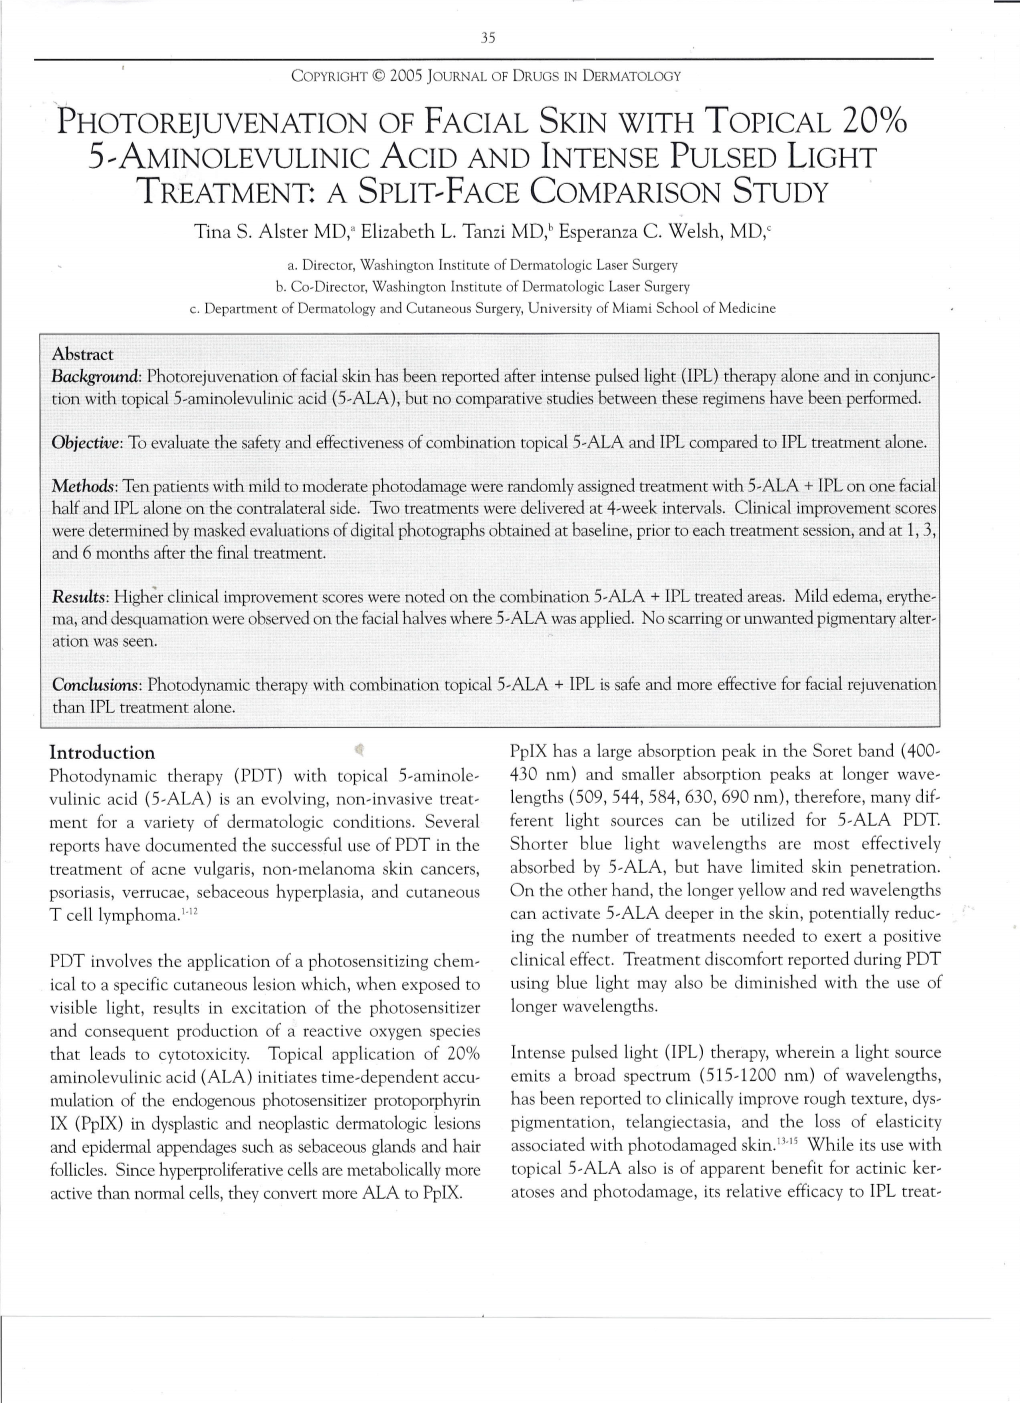 PHOTOREJUVENATION of FACIAL SKIN with TOPICAL 20% 5,AMINOLEVULINIC ACID and INTENSE PULSED LIGHT TREATMENT: a SPLIT,FACE COMPARISON STUDY Tina S